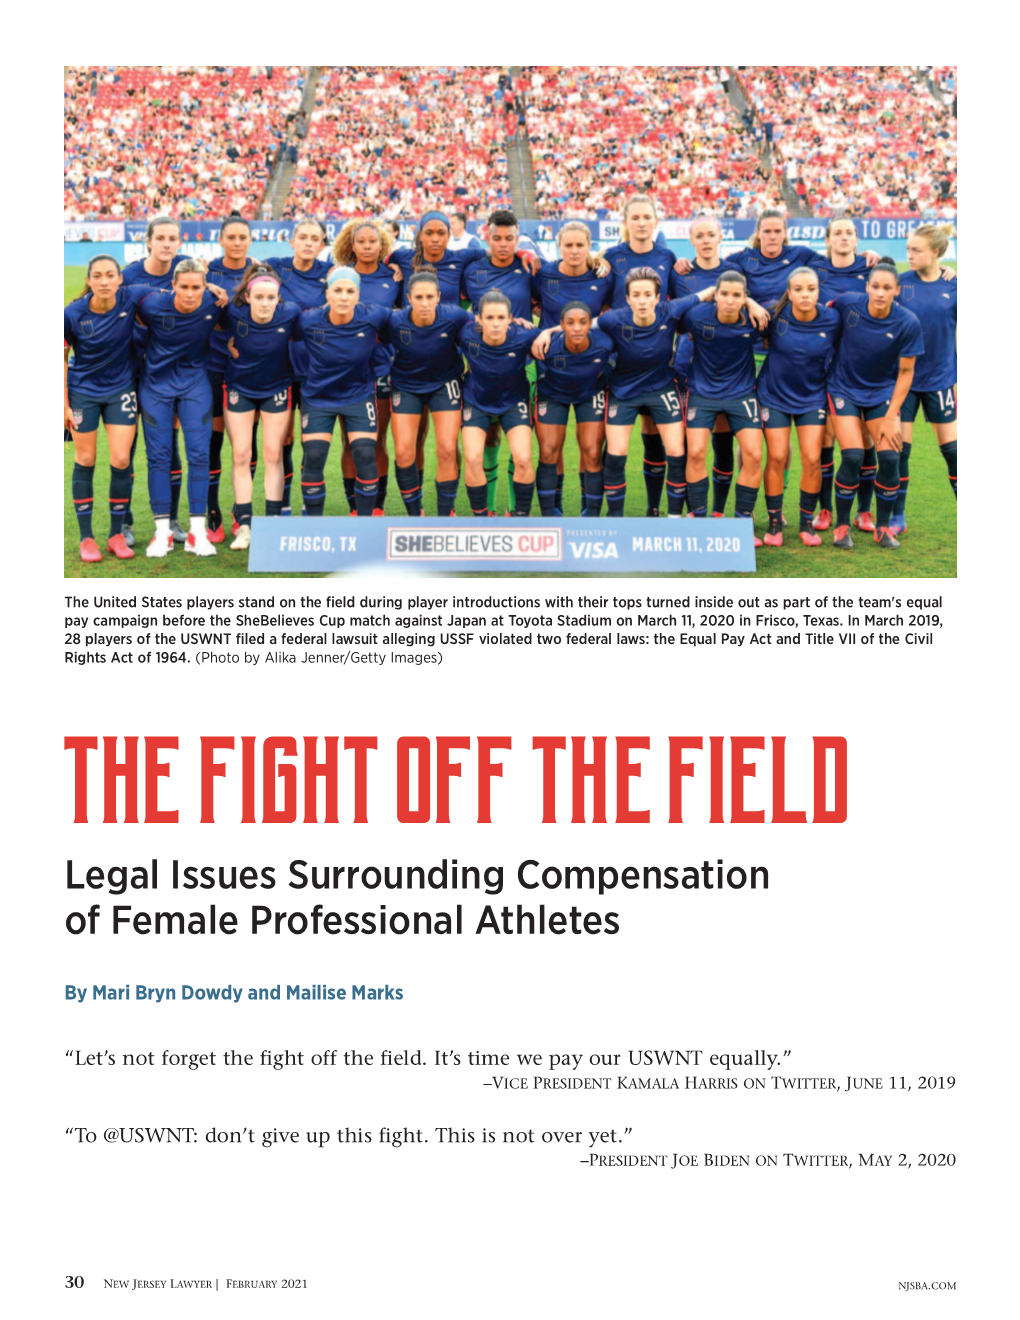 THE FIGHT OFF the FIELD Legal Issues Surrounding Compensation of Female Professional Athletes